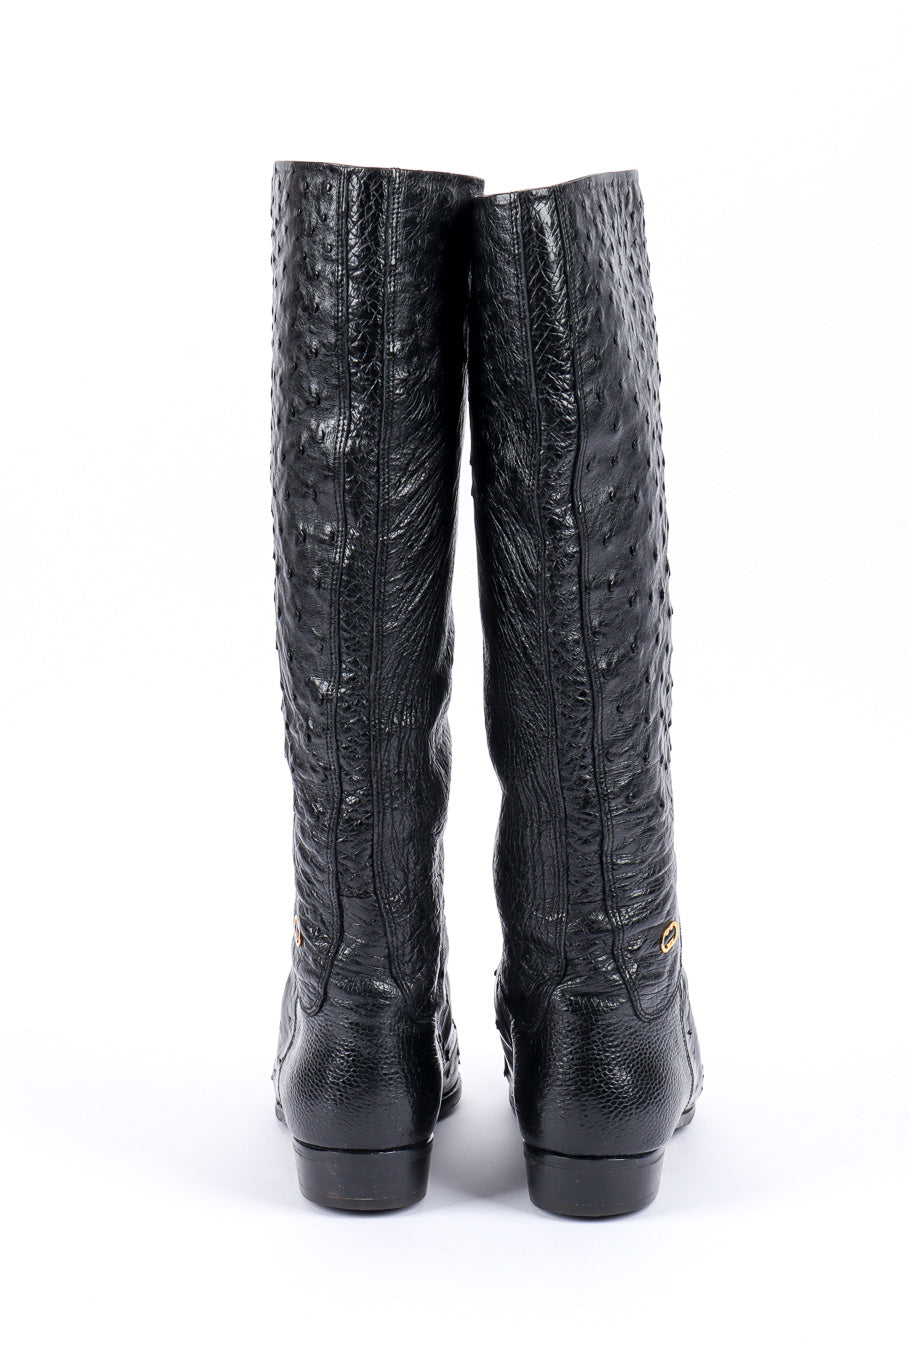 Vintage Gucci Black Ostrich Leather Riding Boot back view @recessla